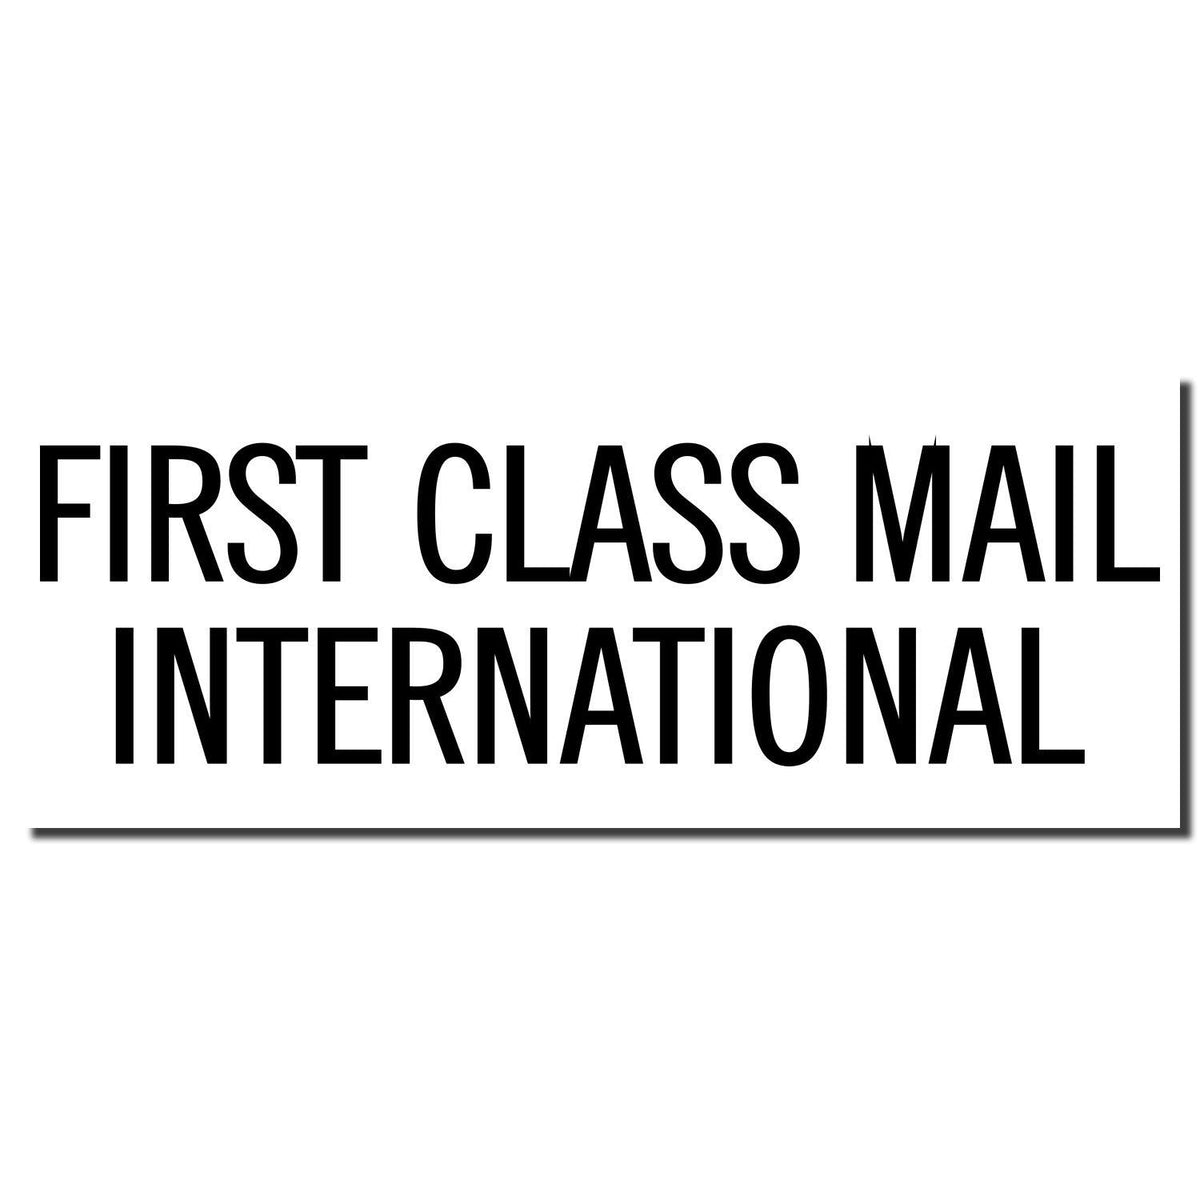 Enlarged Imprint First Class Mail International Rubber Stamp Sample